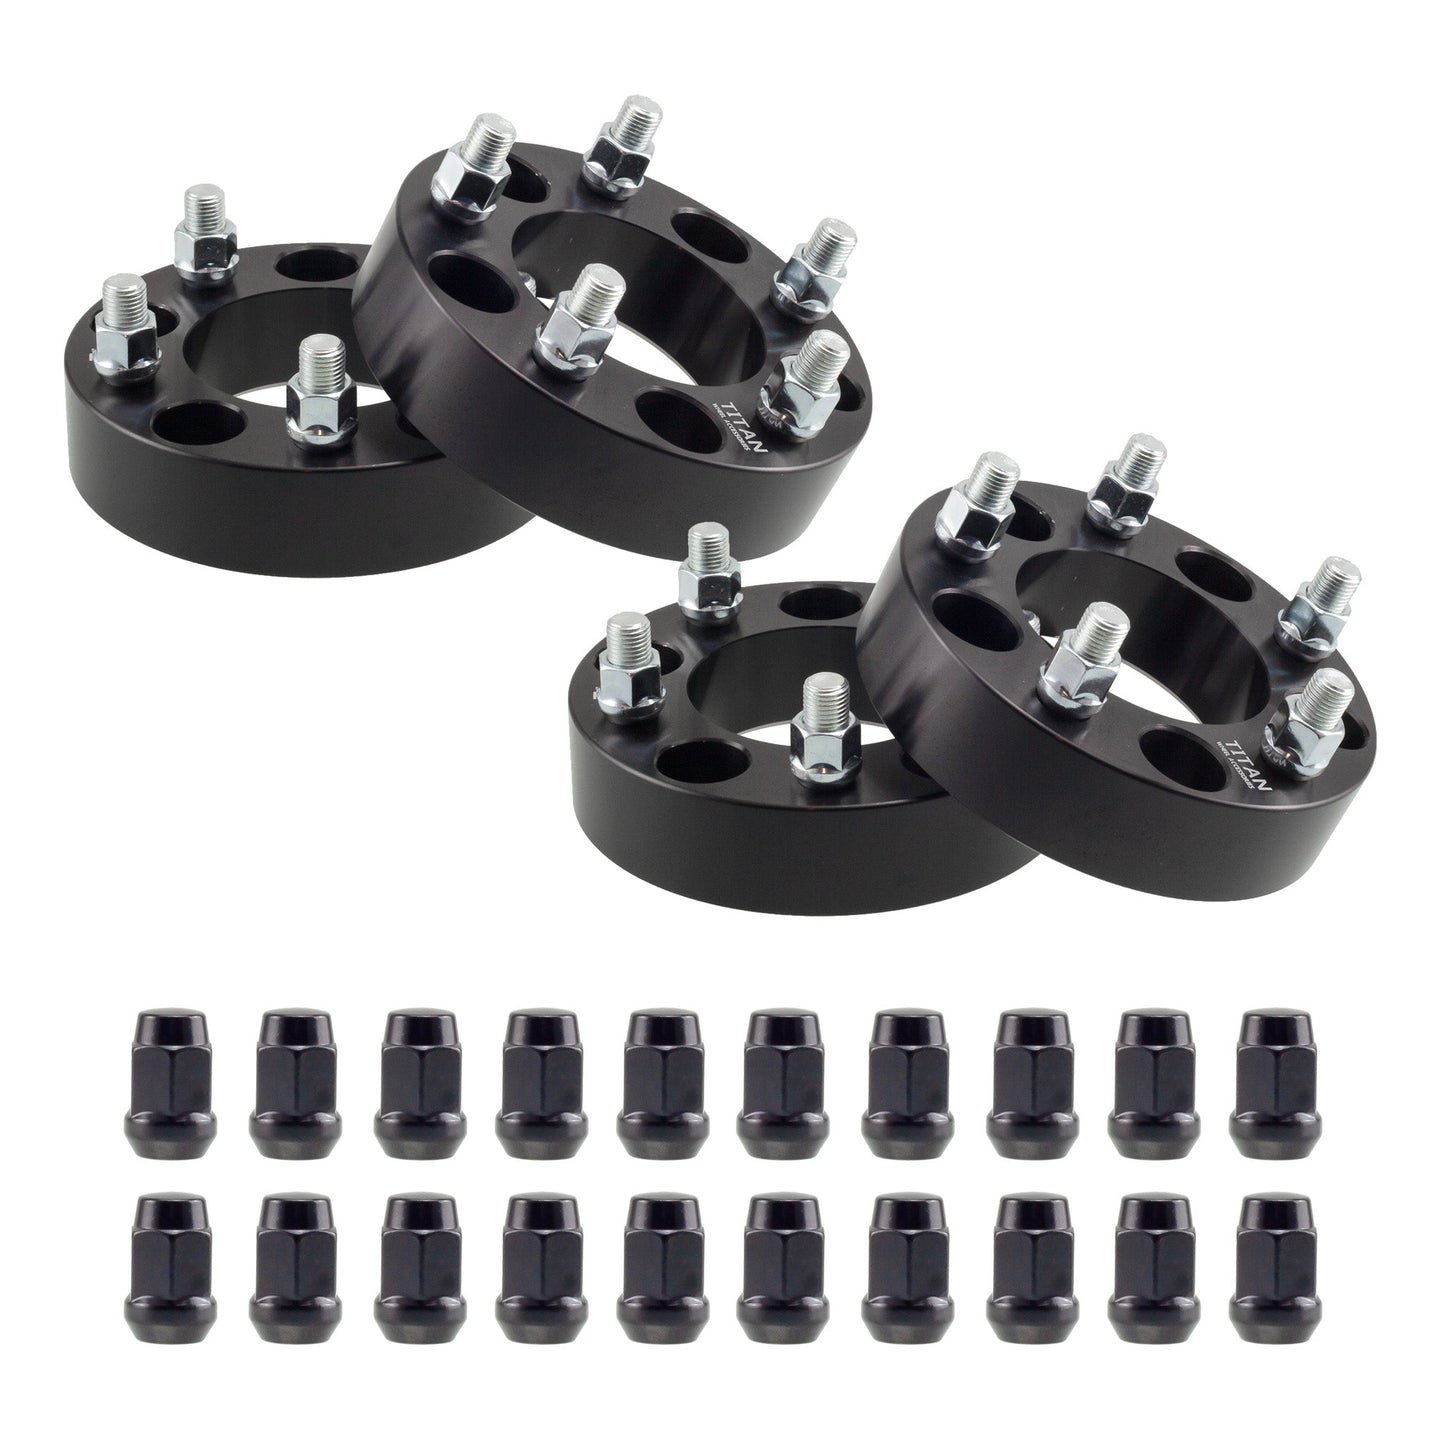 1" (25mm) Titan Wheel Spacers for 2015+ Ford Mustang | 5x4.5 | 70.5 Hubcentric |14x1.5 Studs | Titan Wheel Accessories